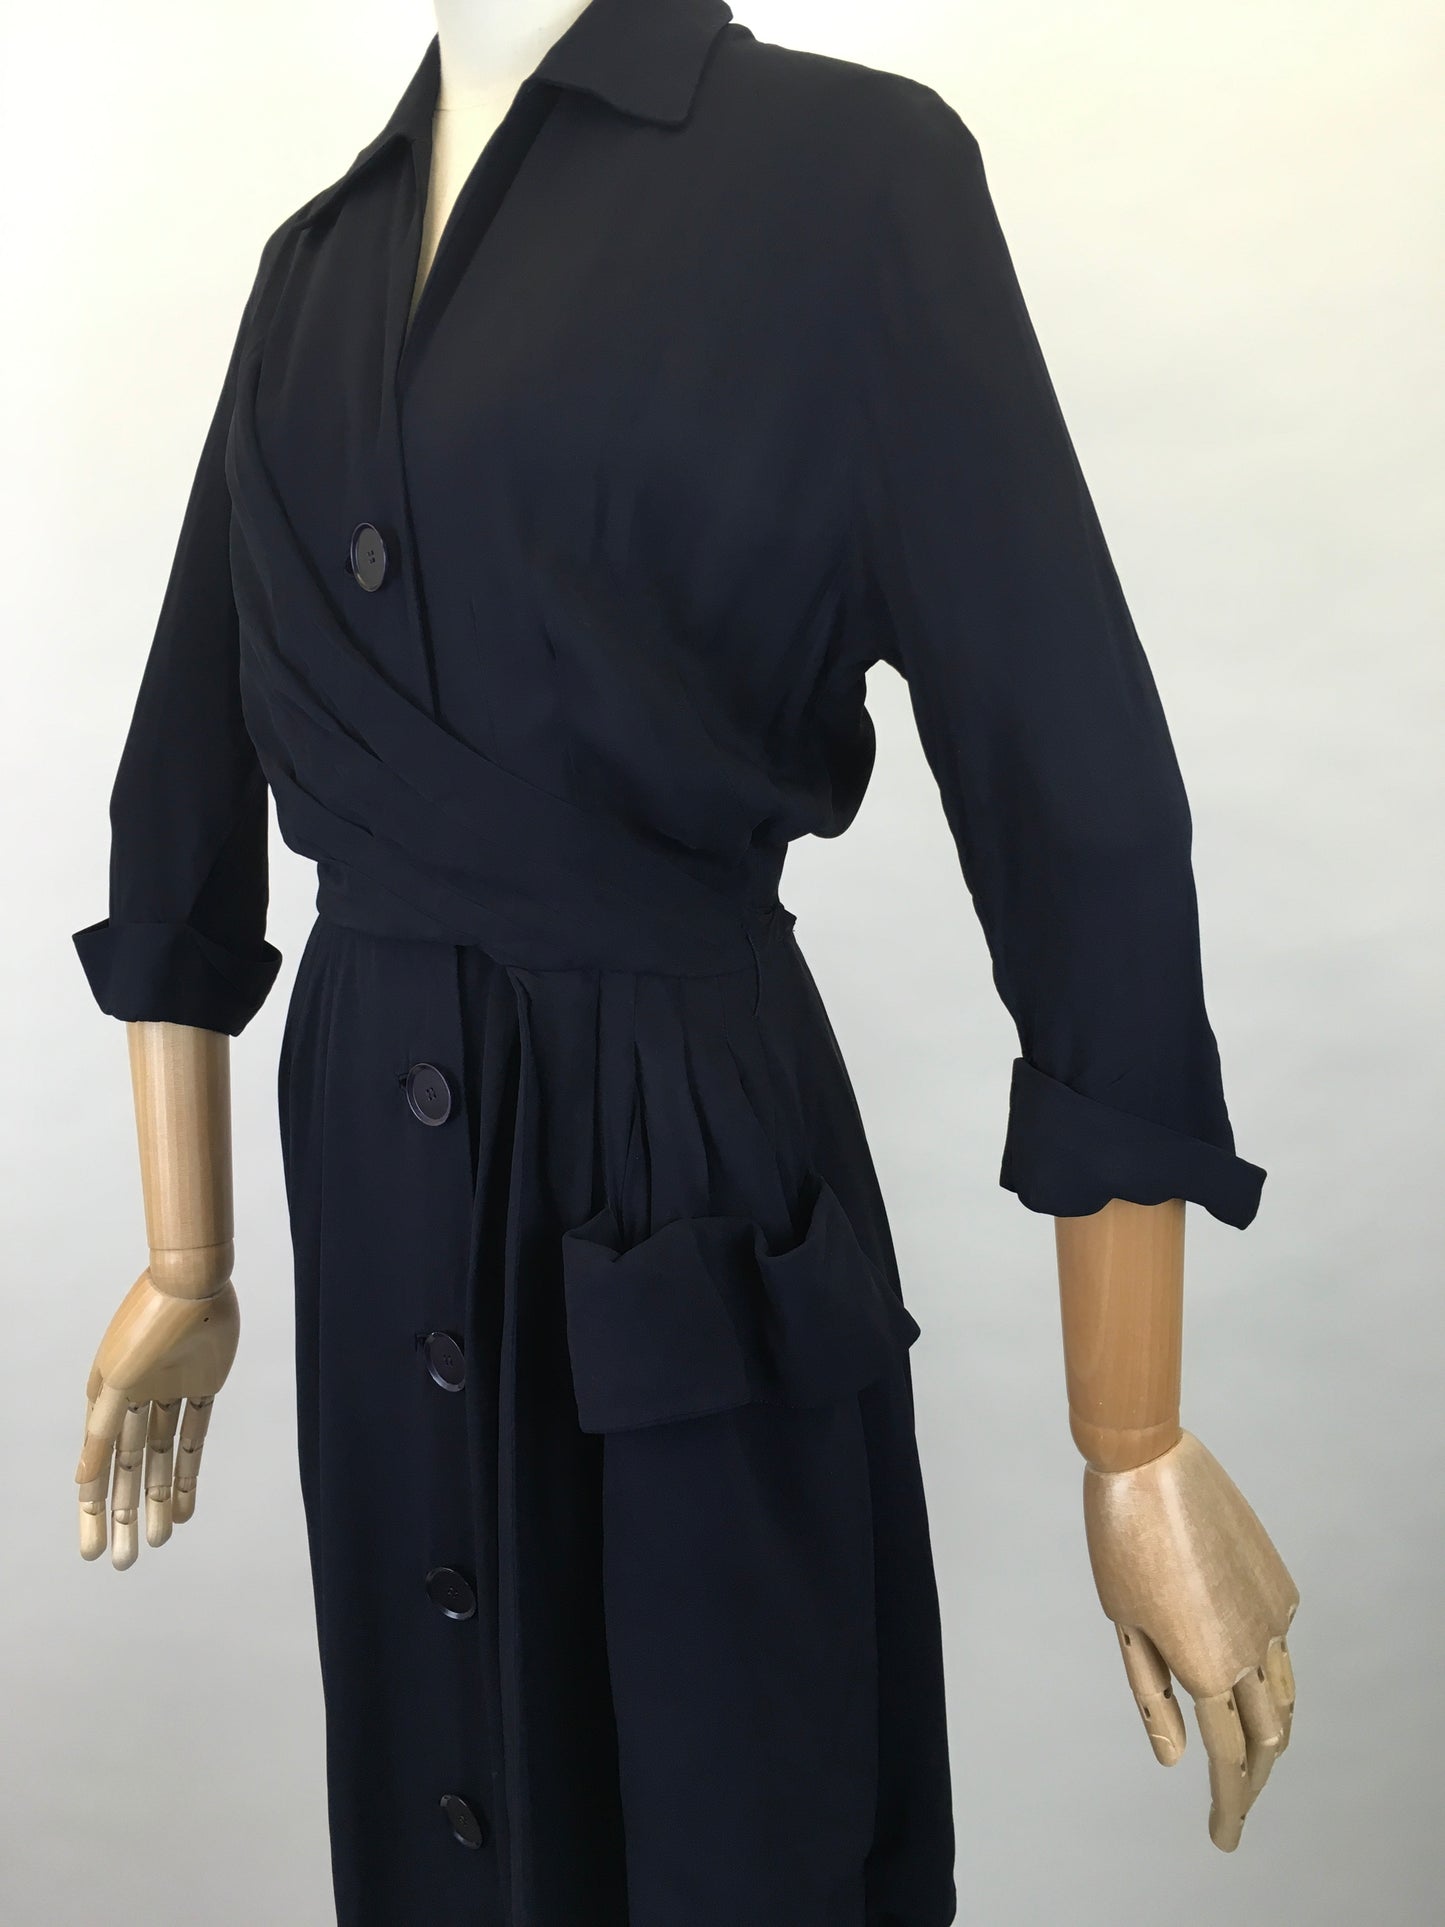 Original 1940s Stunning ‘ Herbert Stonheim ‘ Couture Dress - In a Navy Sheer Rayon with Wrap Hip Swag and Pocket